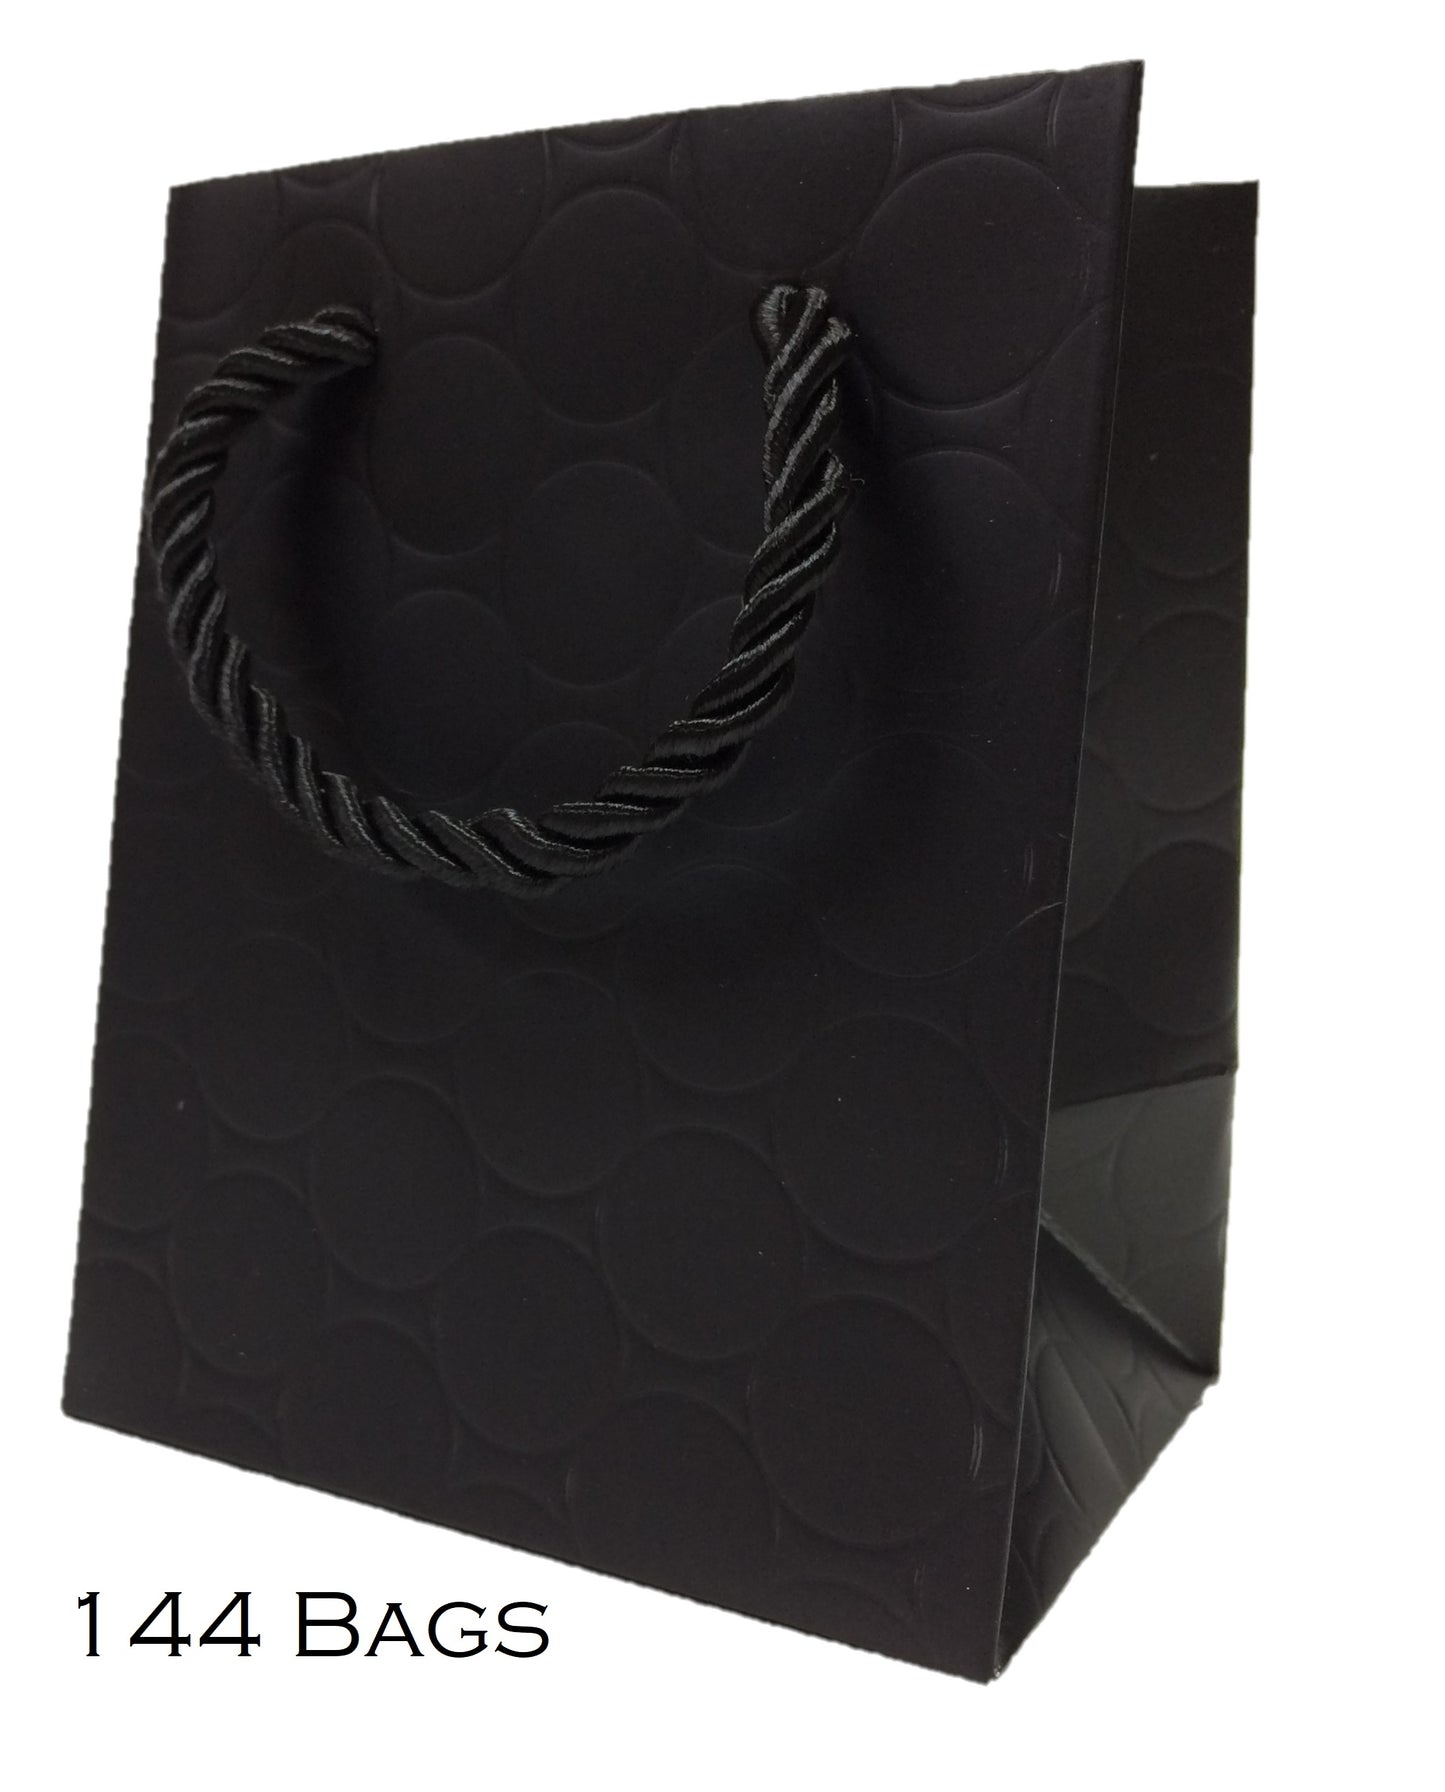 Extra Small Gift Bags with Handles [Pack of 12] Black Little Paper Bags Mini 4x3x5 Premium Quality Fancy Cute Modern Circle Embossed for Jewelry Merchandise Charms Wedding Shopping